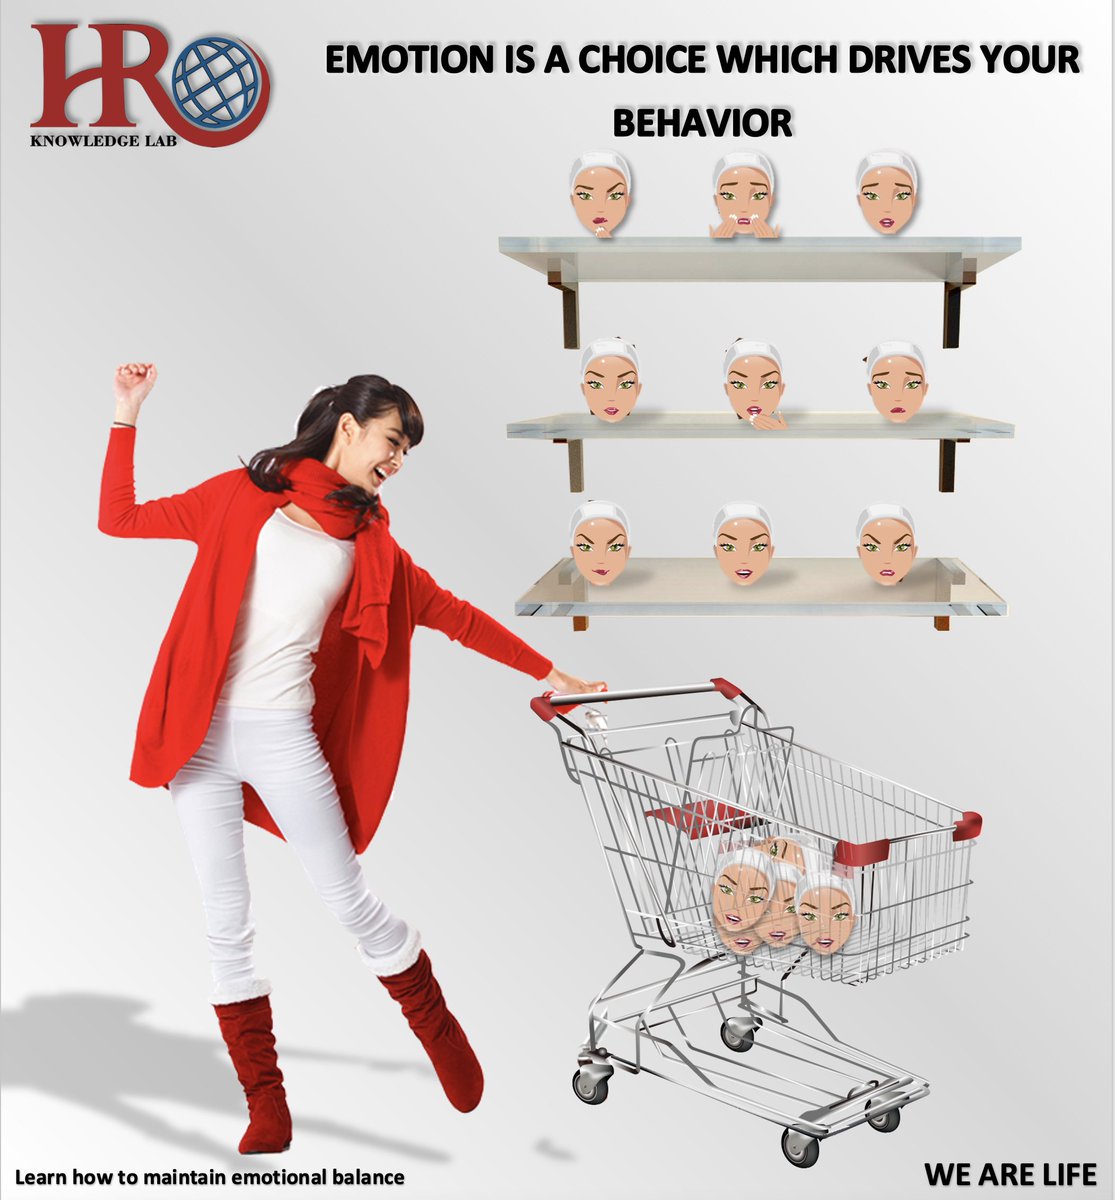 Emotional awareness is emotional intelligence. we can help you be emotionally balanced.

#emotions  #emotionalhealth #emotionalbalance #emotionawarness #emotionintellegence #emotionalintelligencematters #emotionalintellegent #emotionalintelligencetraining #hrknowledgelab